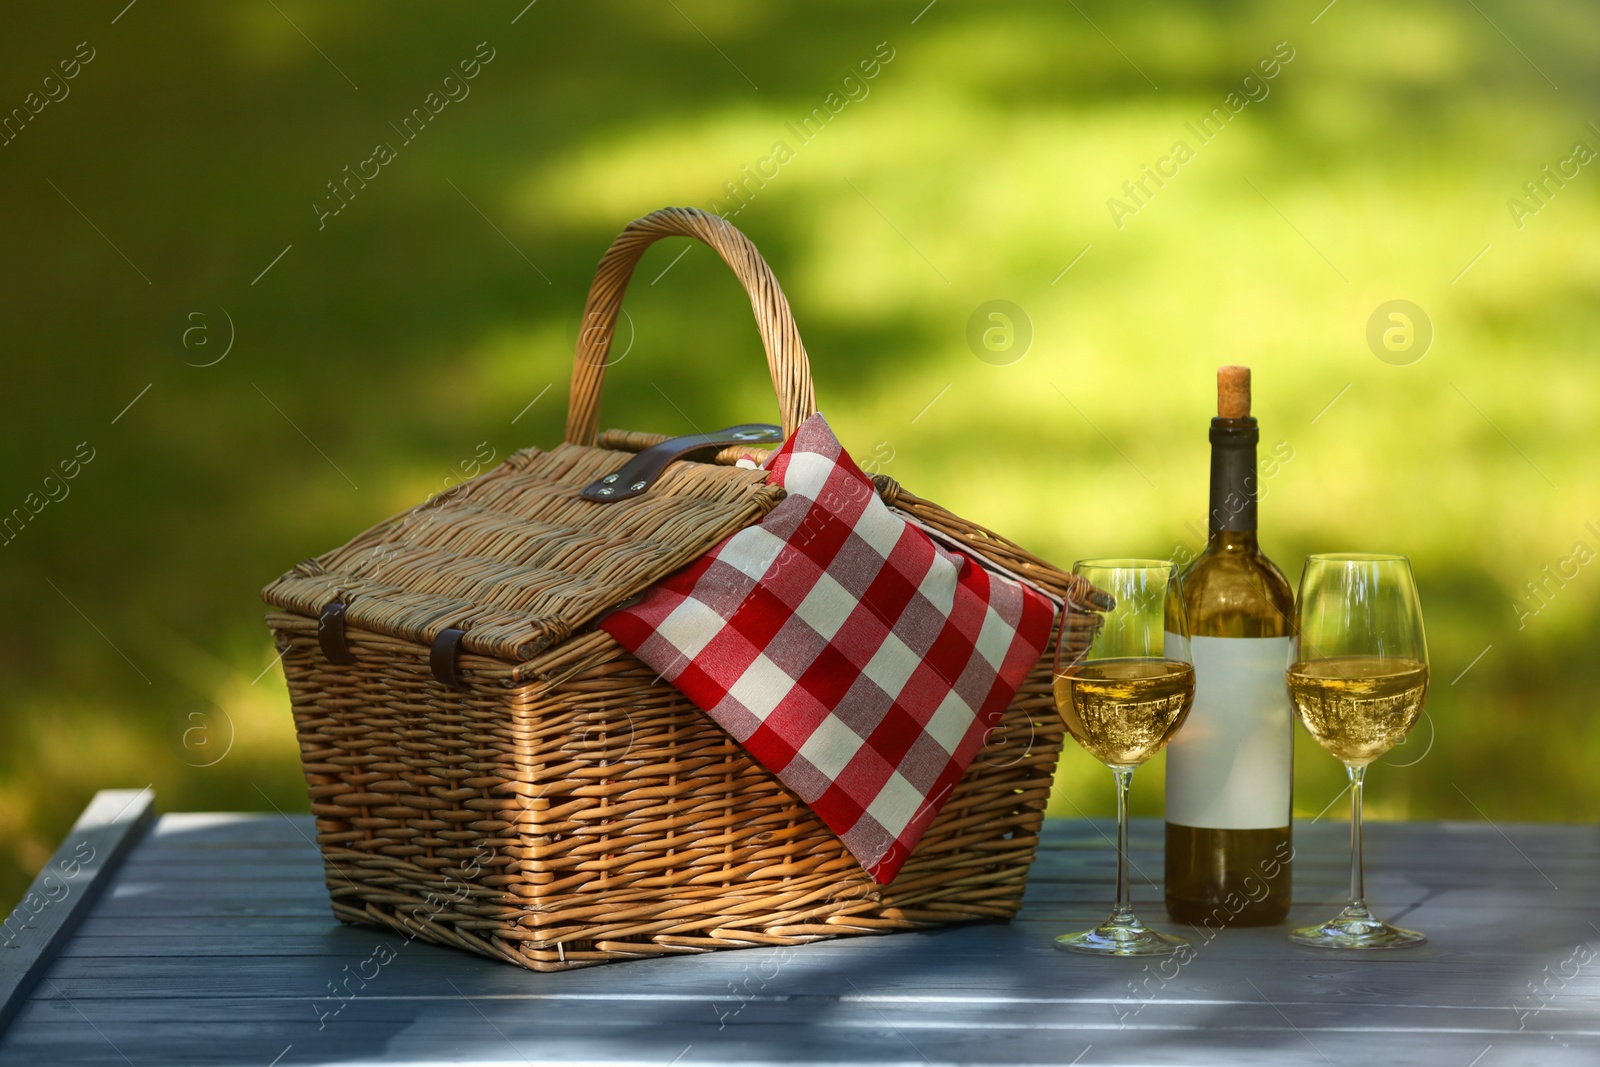 Photo of Wicker basket with blanket and wine on table in park. Summer picnic